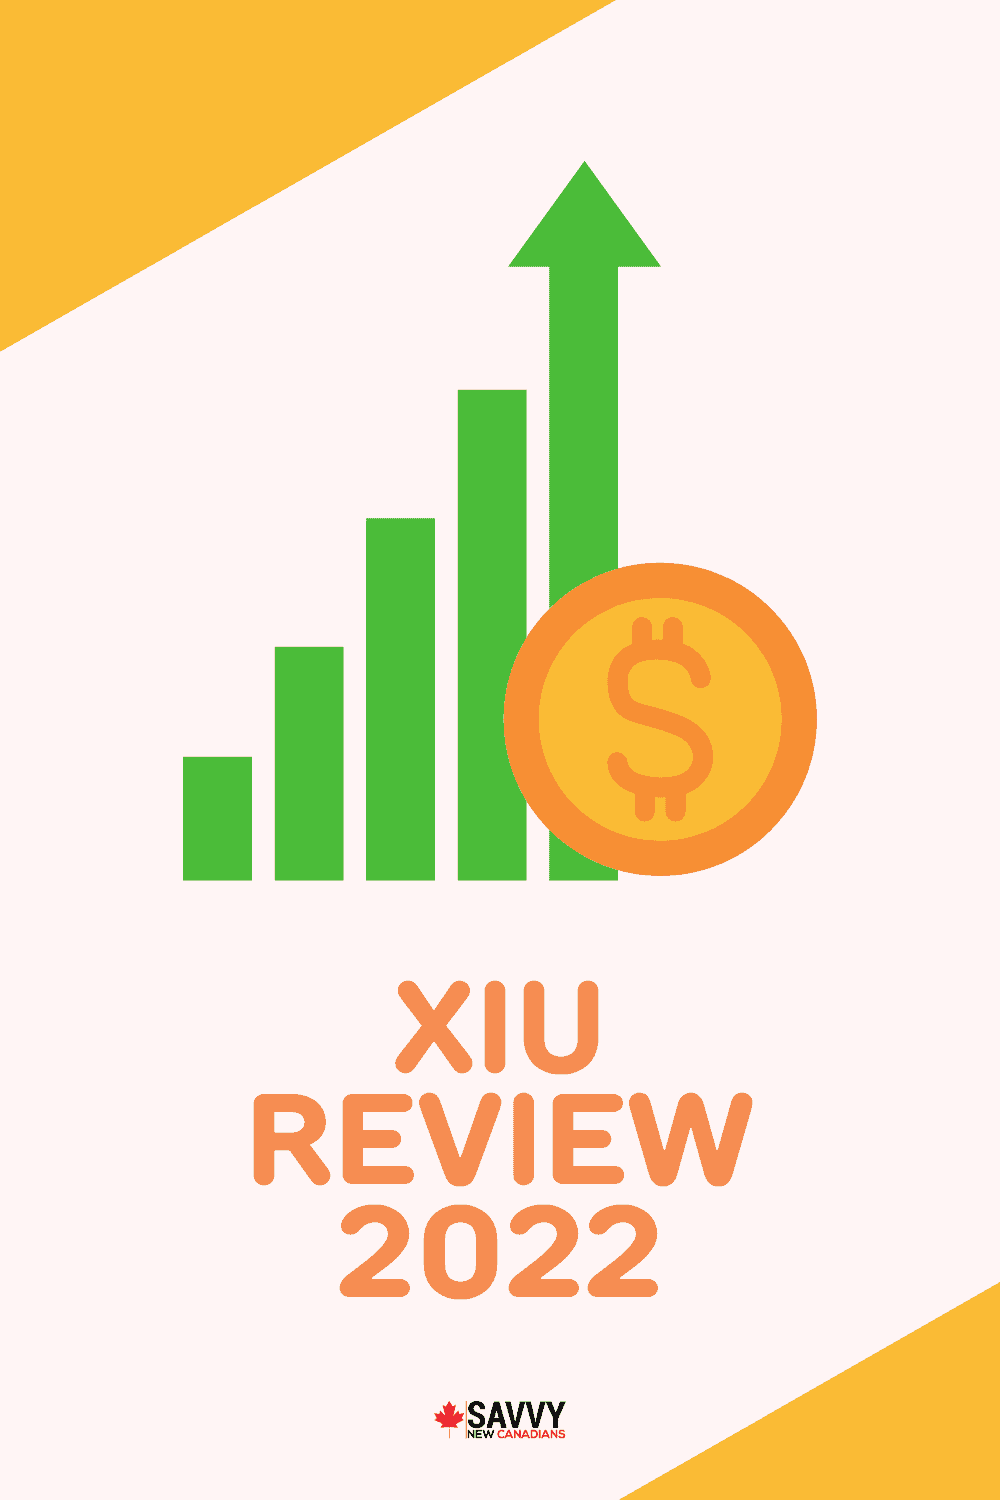 XIU Review 2022: iShares S&P/TSX 60 Index ETF Explained